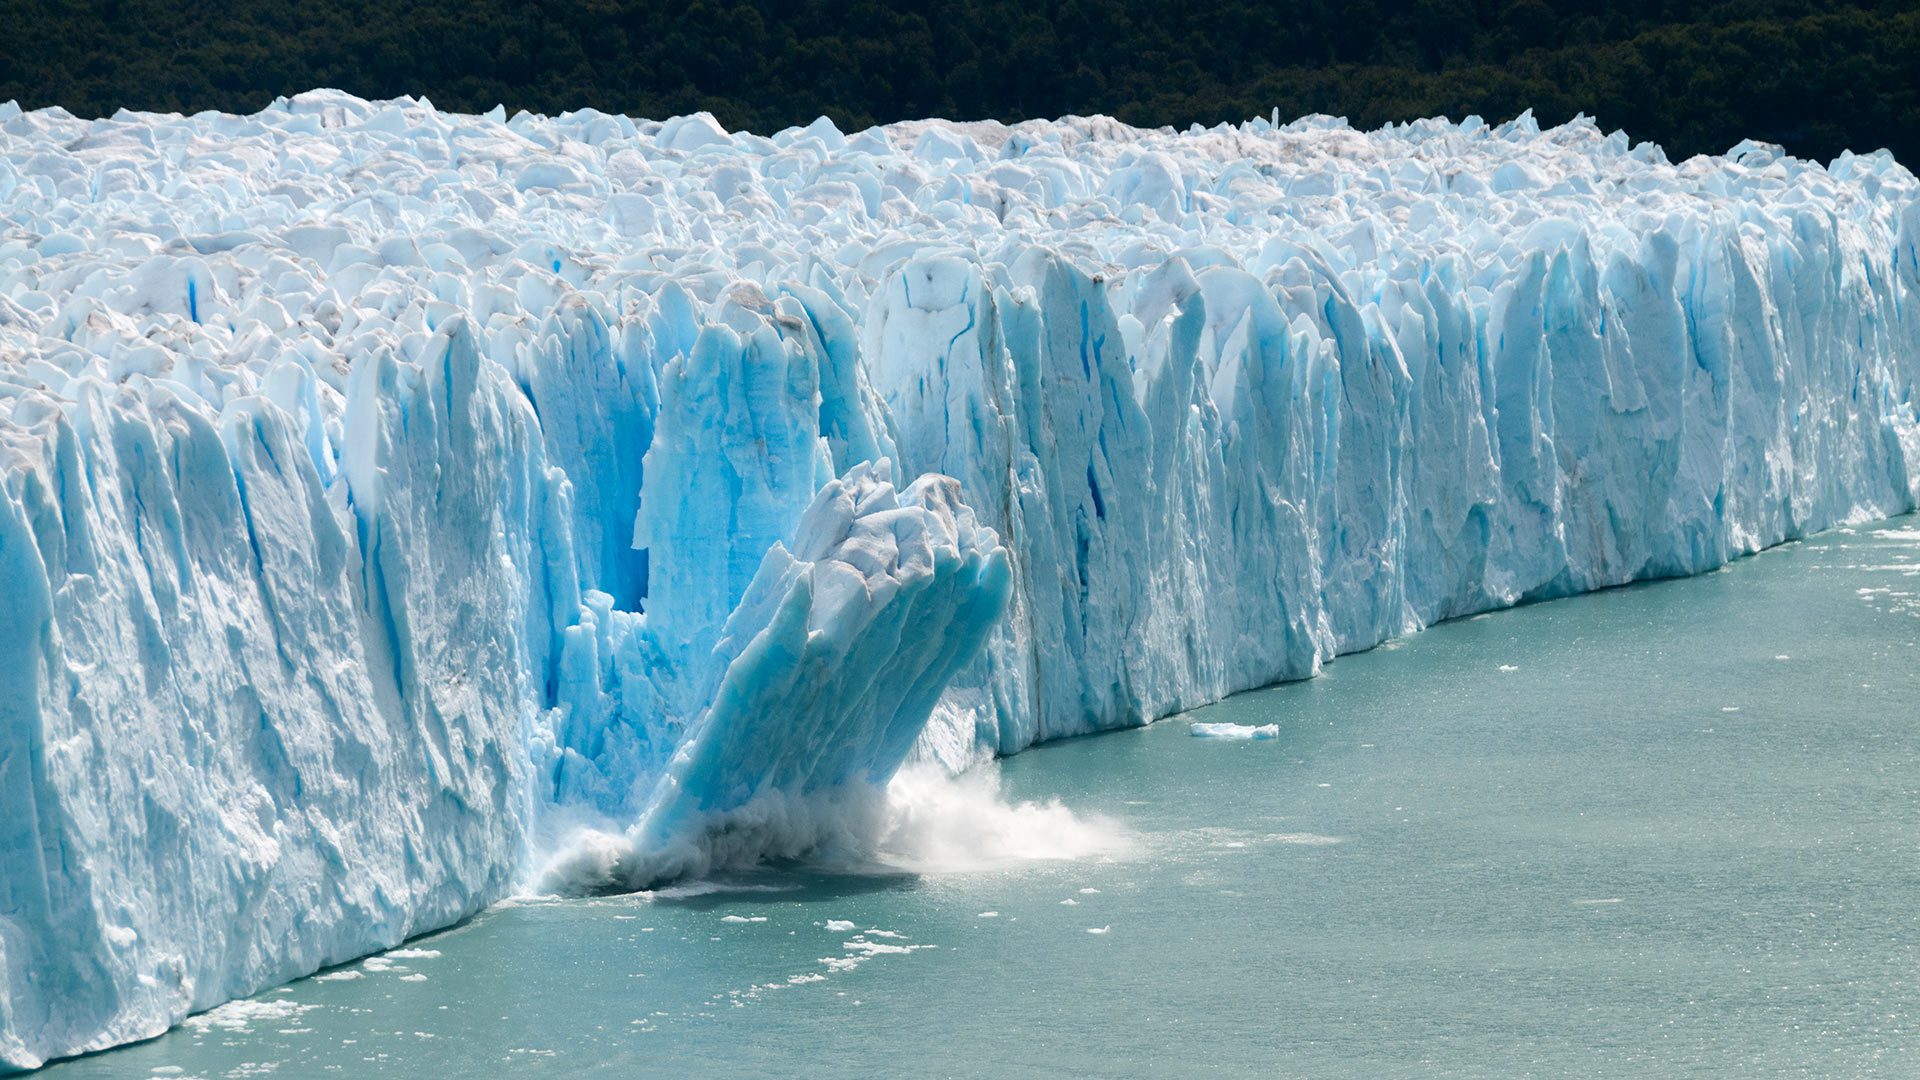 Melting glaciers due to climate change